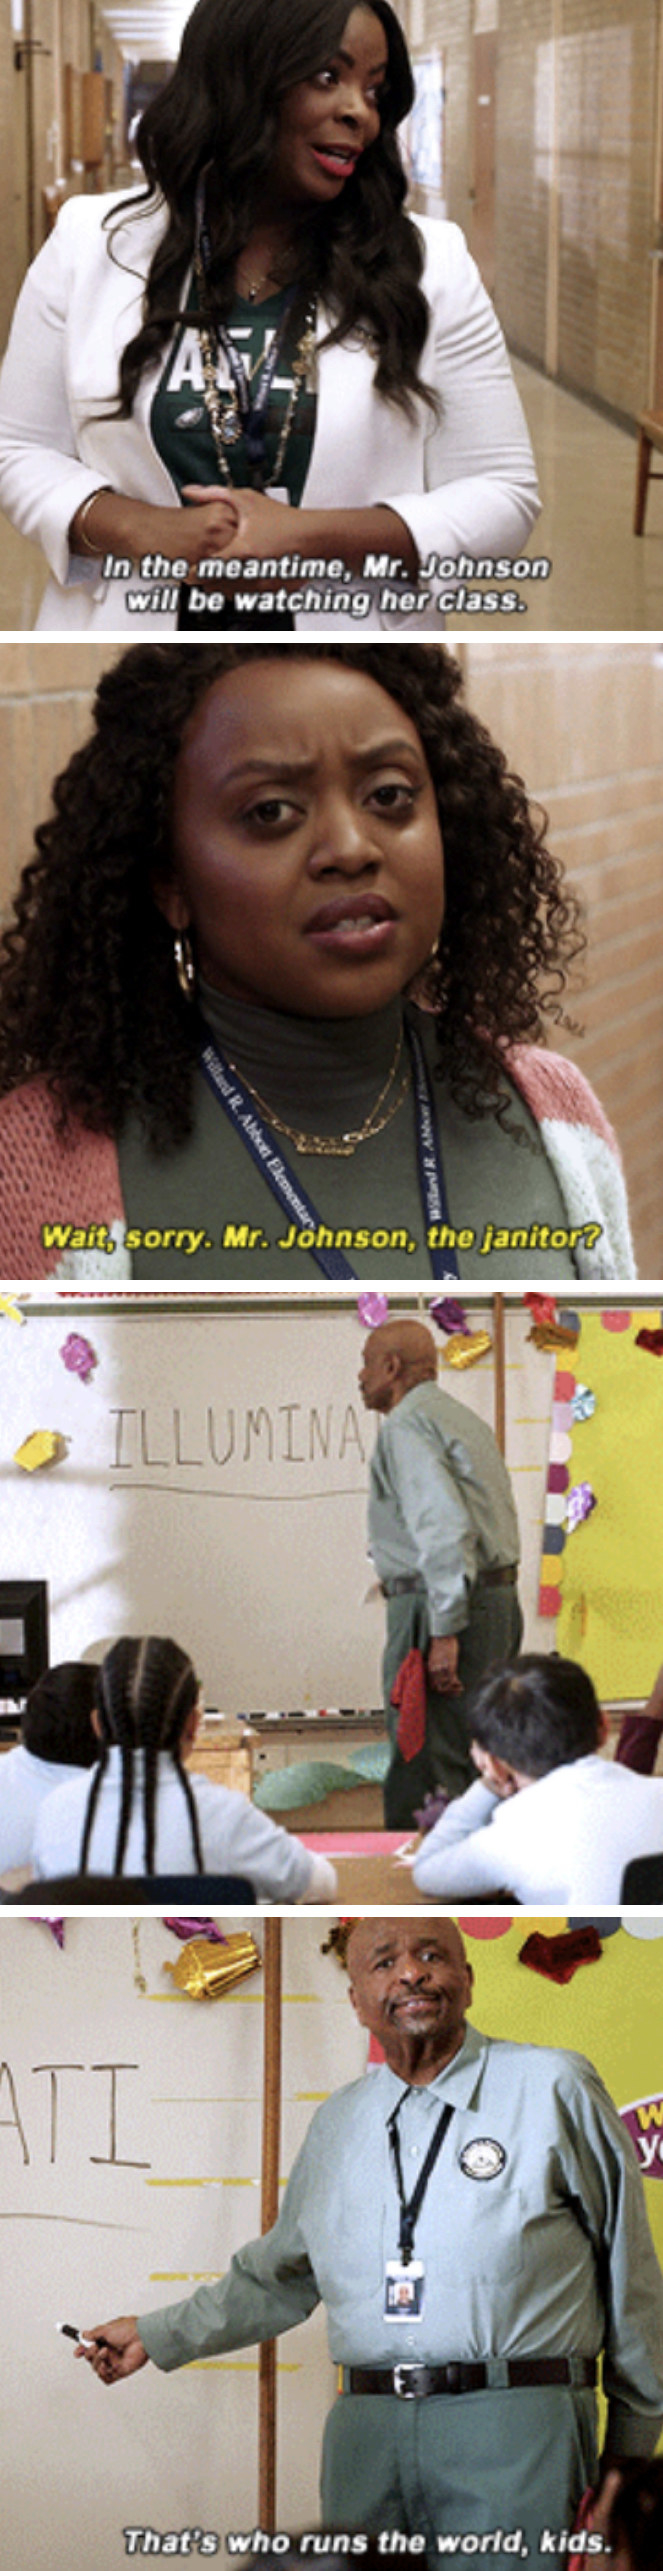 Ava: &quot;In the meantime, Mr. Johnson will be watching her class&quot; Janine: &quot;Wait, sorry. Mr. Johnson, the janitor?&quot; Mr. Johnson: [Pointing at board that reads &#x27;illuminati:&#x27; &#x27;That&#x27;s who runs the world, kids&quot;